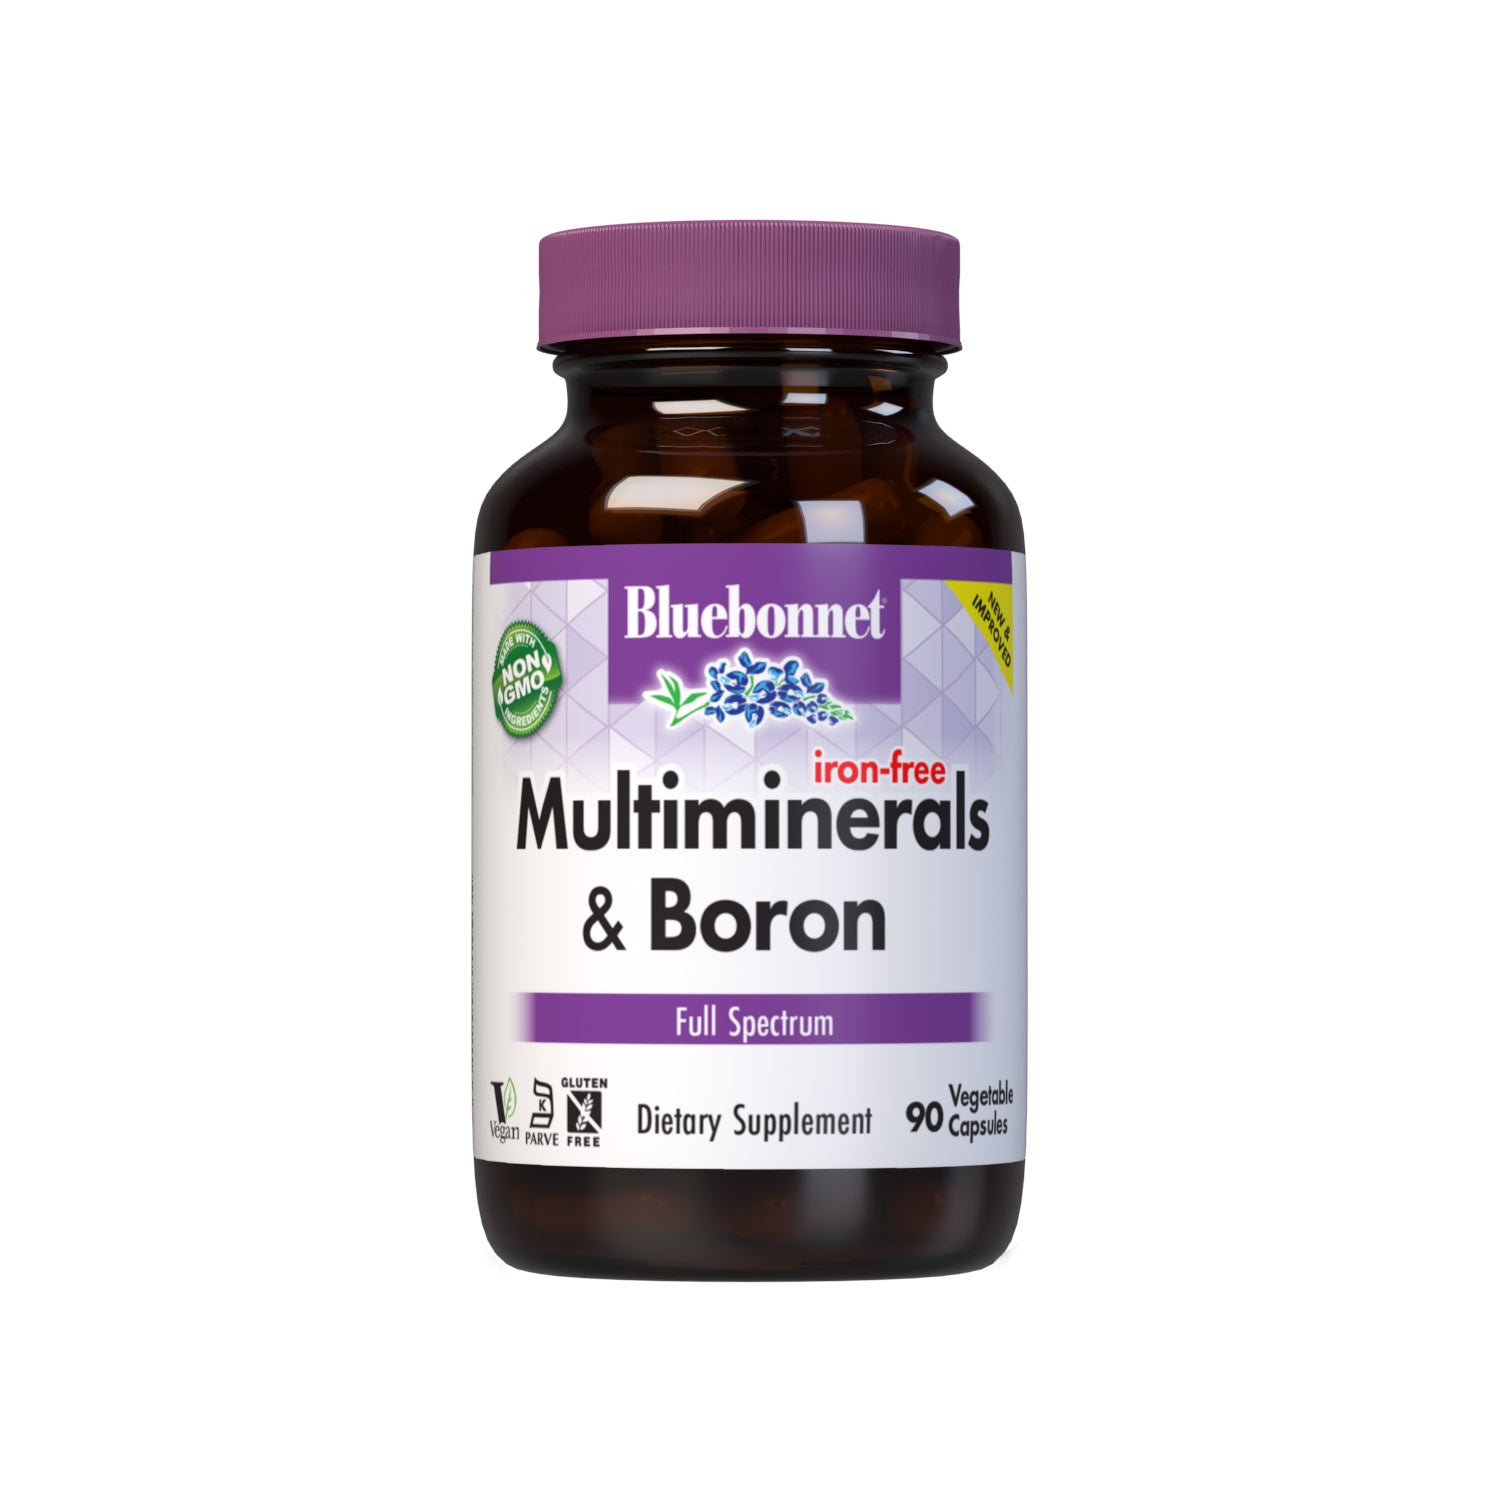 Bluebonnet’s Iron-Free Multiminerals & Boron (iron-free) 90 Vegetable Capsules are formulated with advanced chelating agents, including: aspartates, citrates, picolinates and histidinates for bone support. #size_90 count